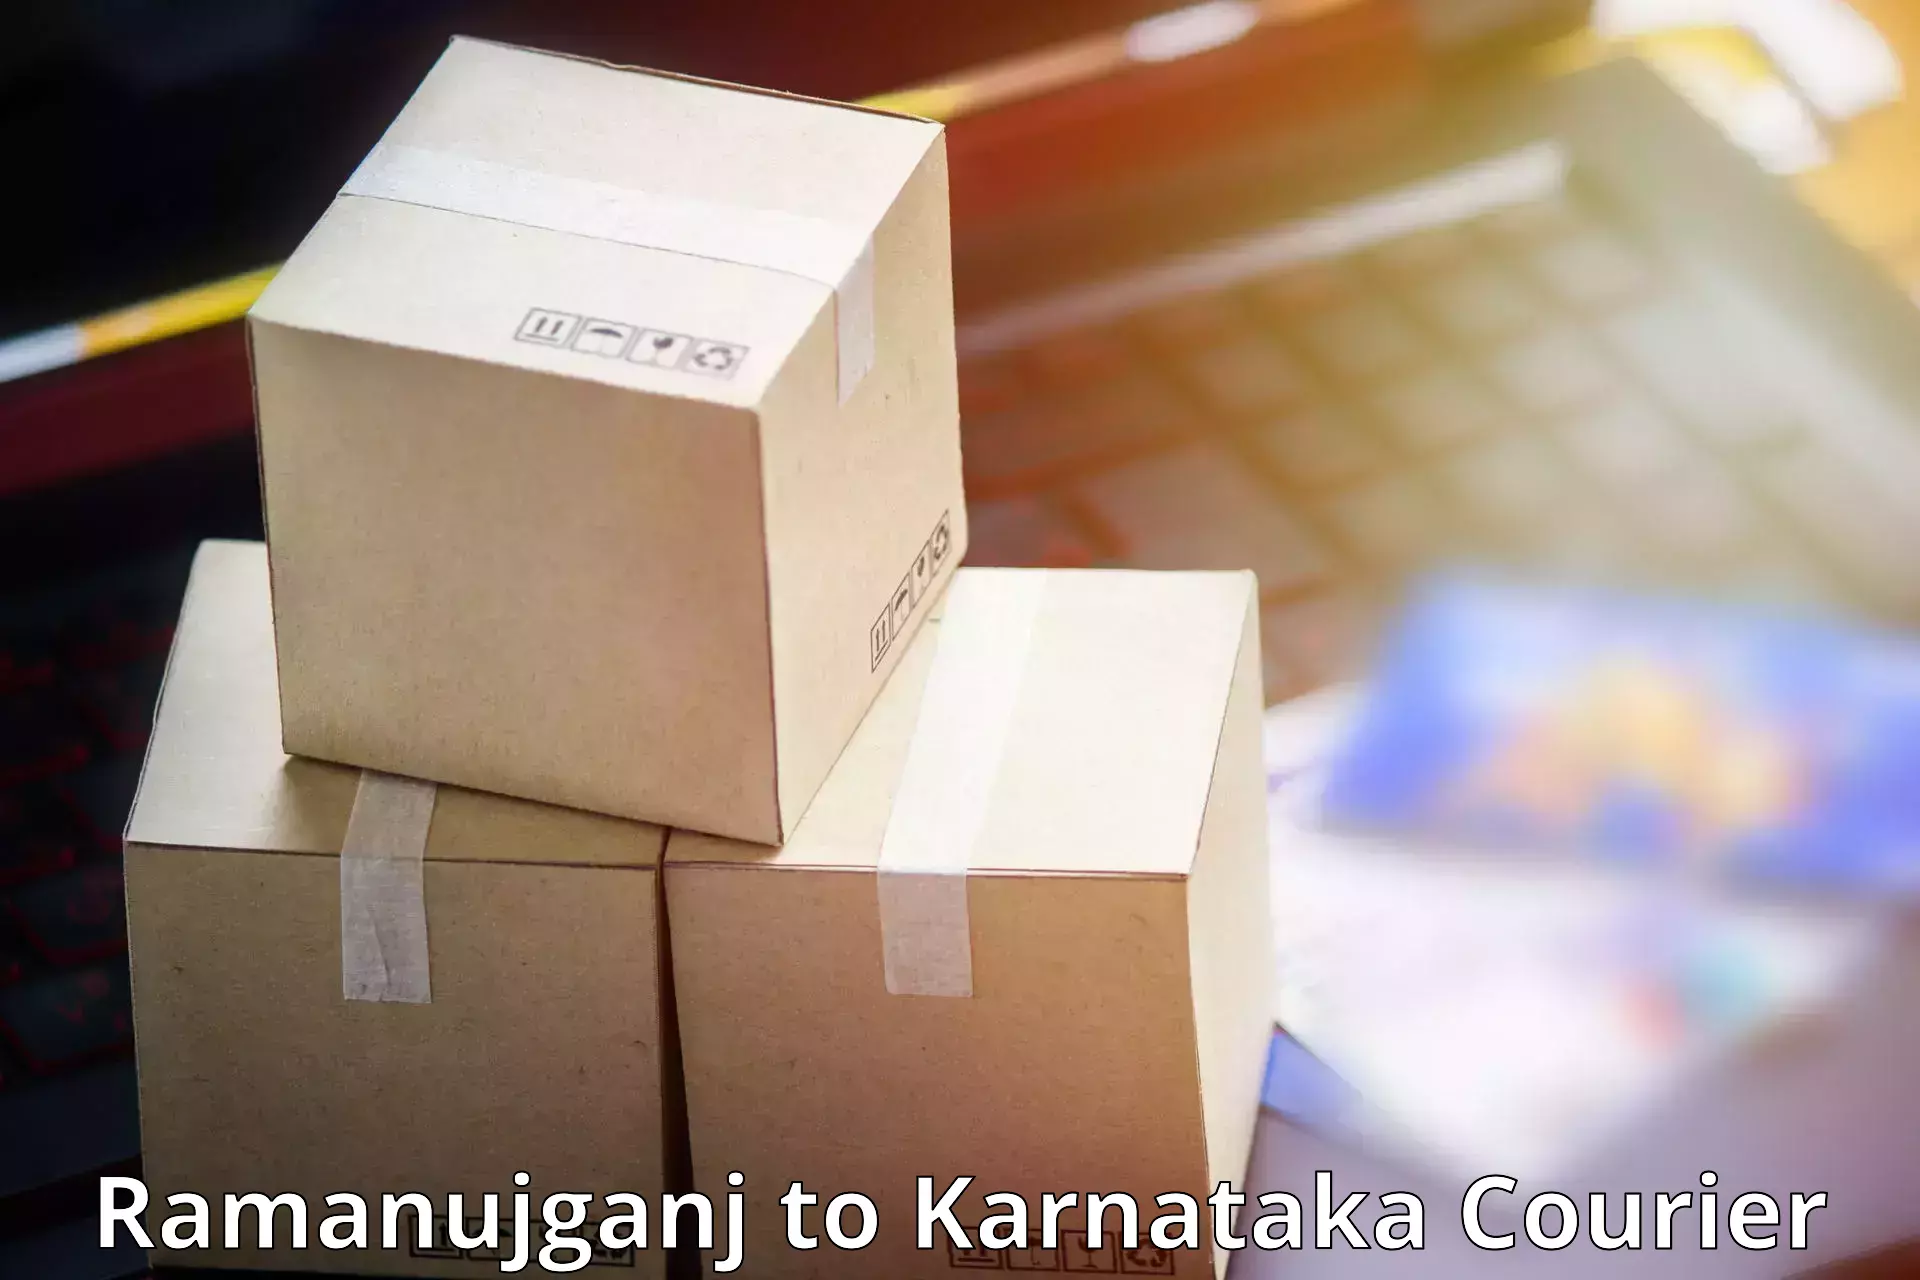 24/7 courier service Ramanujganj to KLE Academy of Higher Education and Research Belagavi